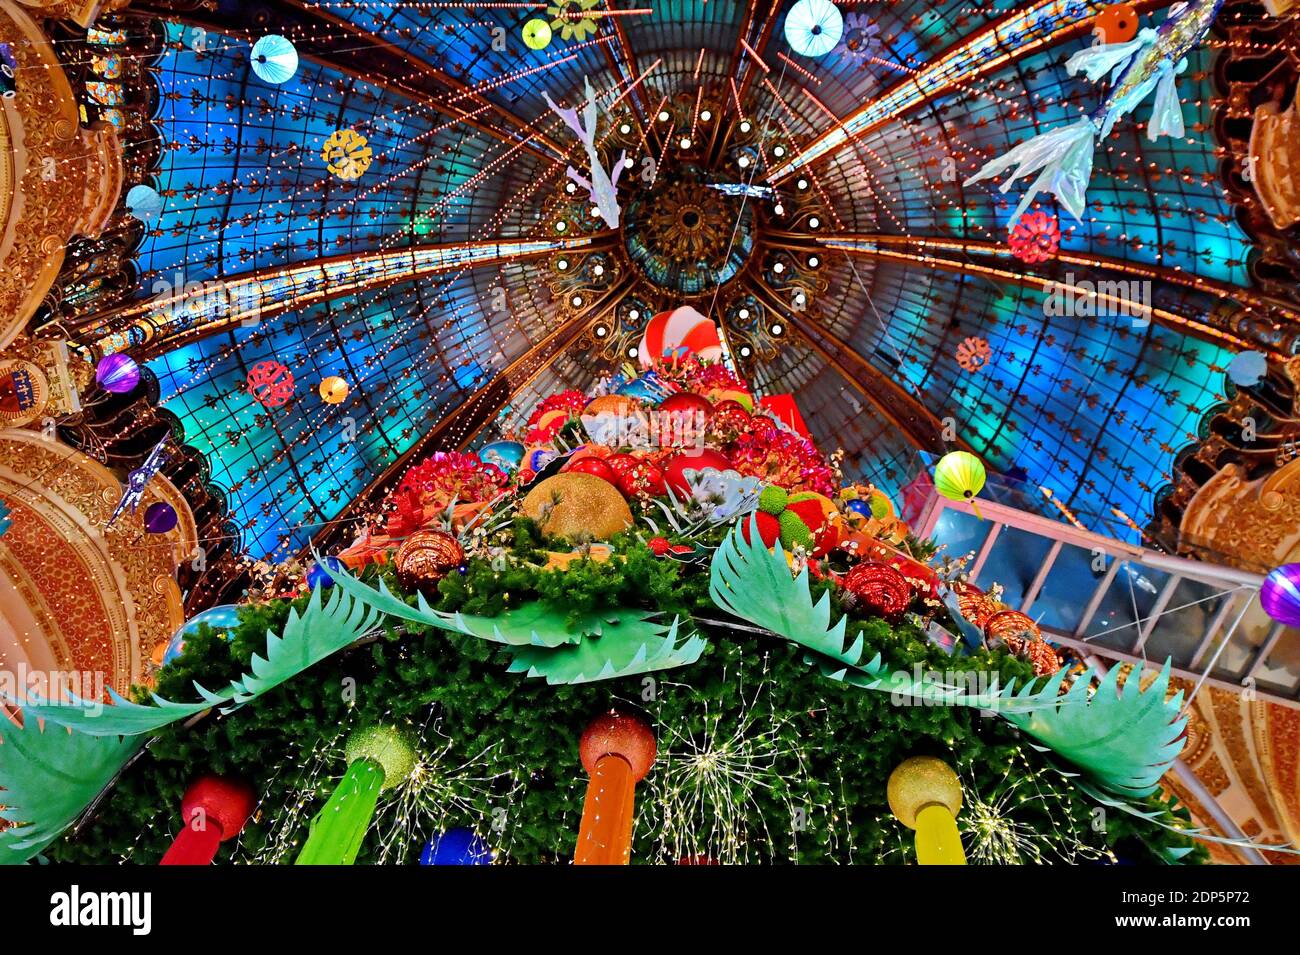 Paris, France. 18th Dec 2020. A huge Christmas tree stands in the Galeries Lafayette department store for holiday season on December 18, 2020 in Paris, France. The Galeries Lafayette opened 1912 and was designed by Georges Chedanne and his pupil Ferdinand Chanut, with a huge glass and steel dome, art nouveau staircases and 3 levels of balconies. Photo by Karim Ait Adjedjou/Avenir Pictures/ABACAPRESS.COM Credit: ABACAPRESS/Alamy Live News Stock Photo